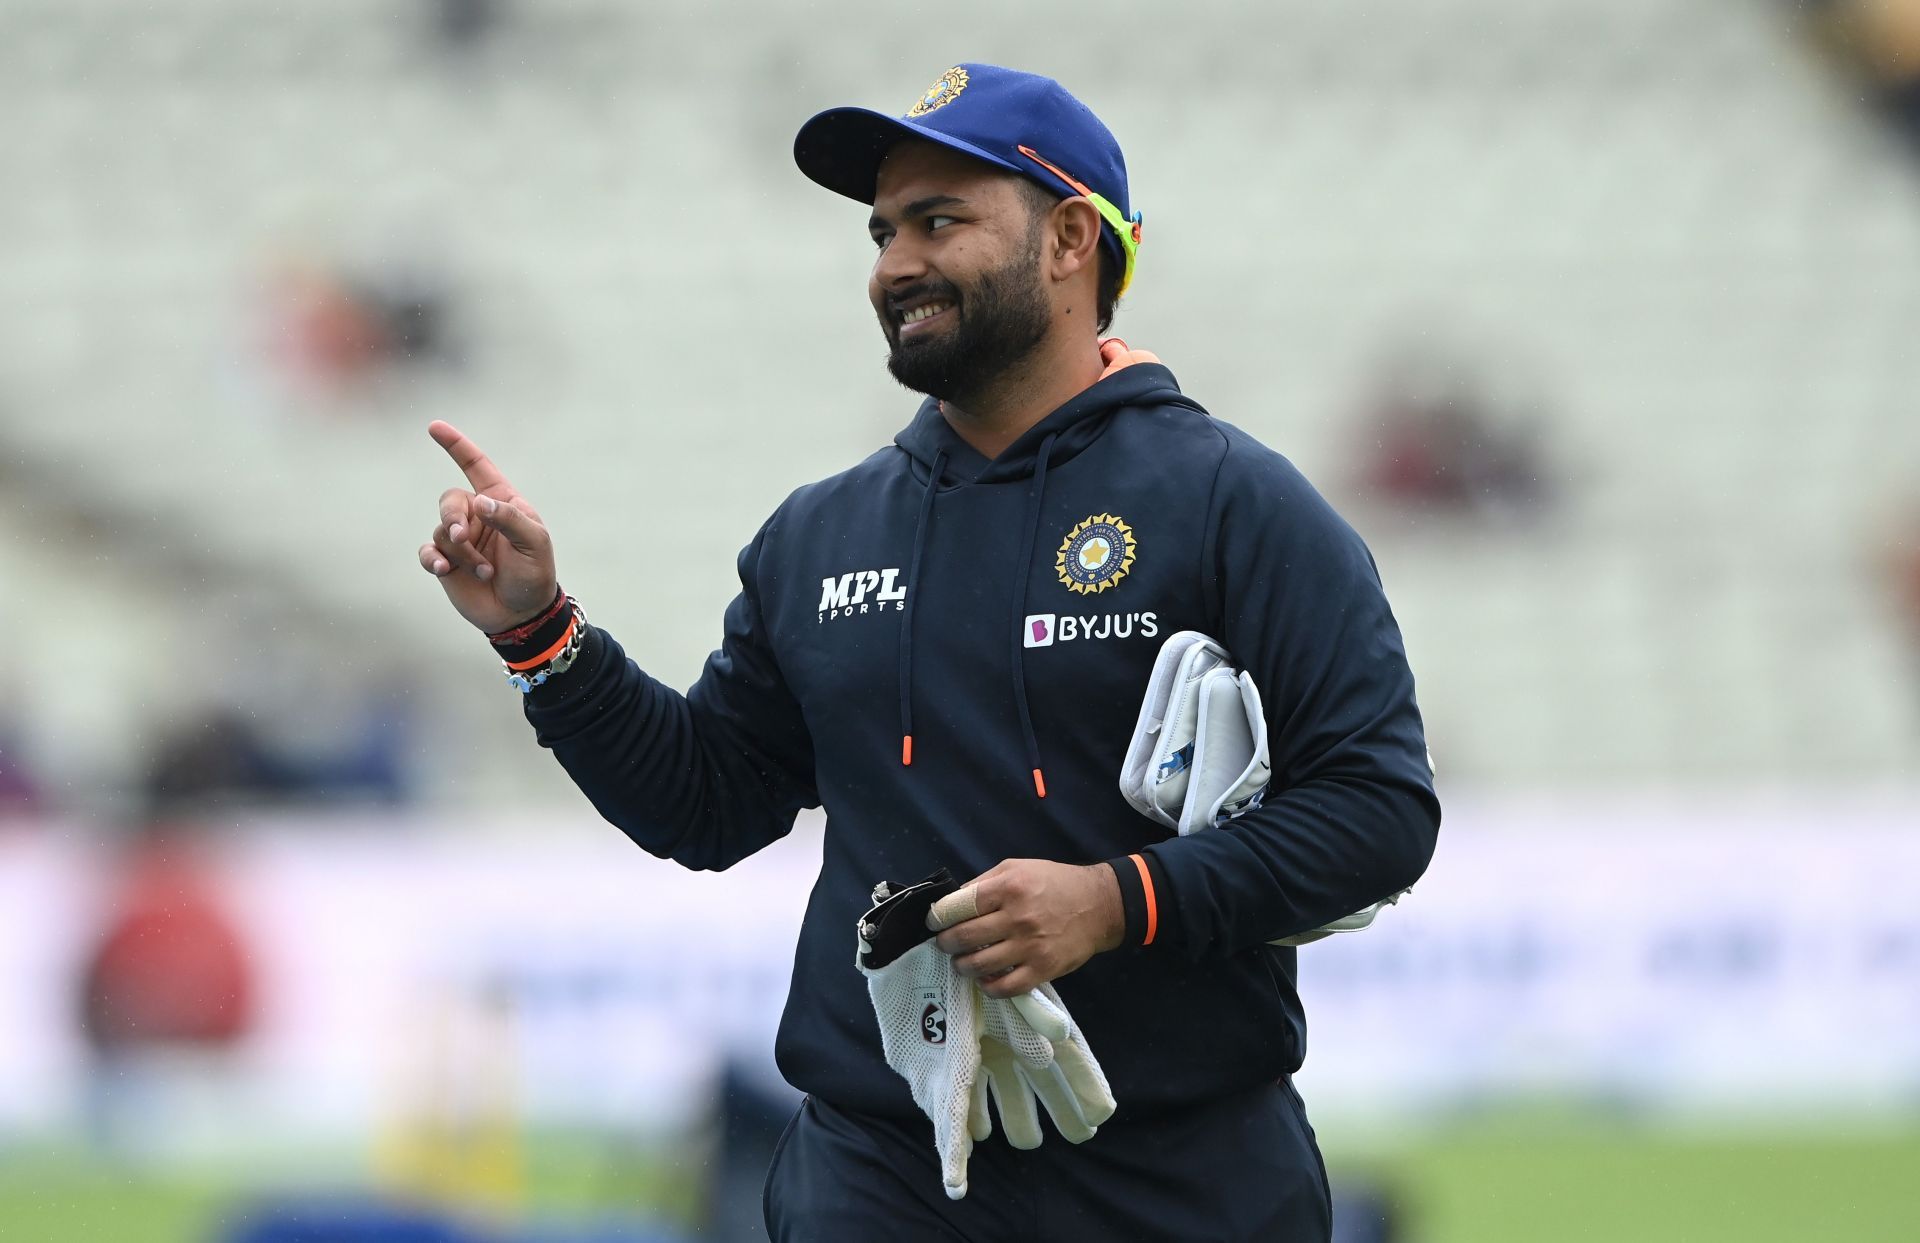 Rishabh Pant has been away from cricket for the last few months due to injuries sustained in a horrific accident.